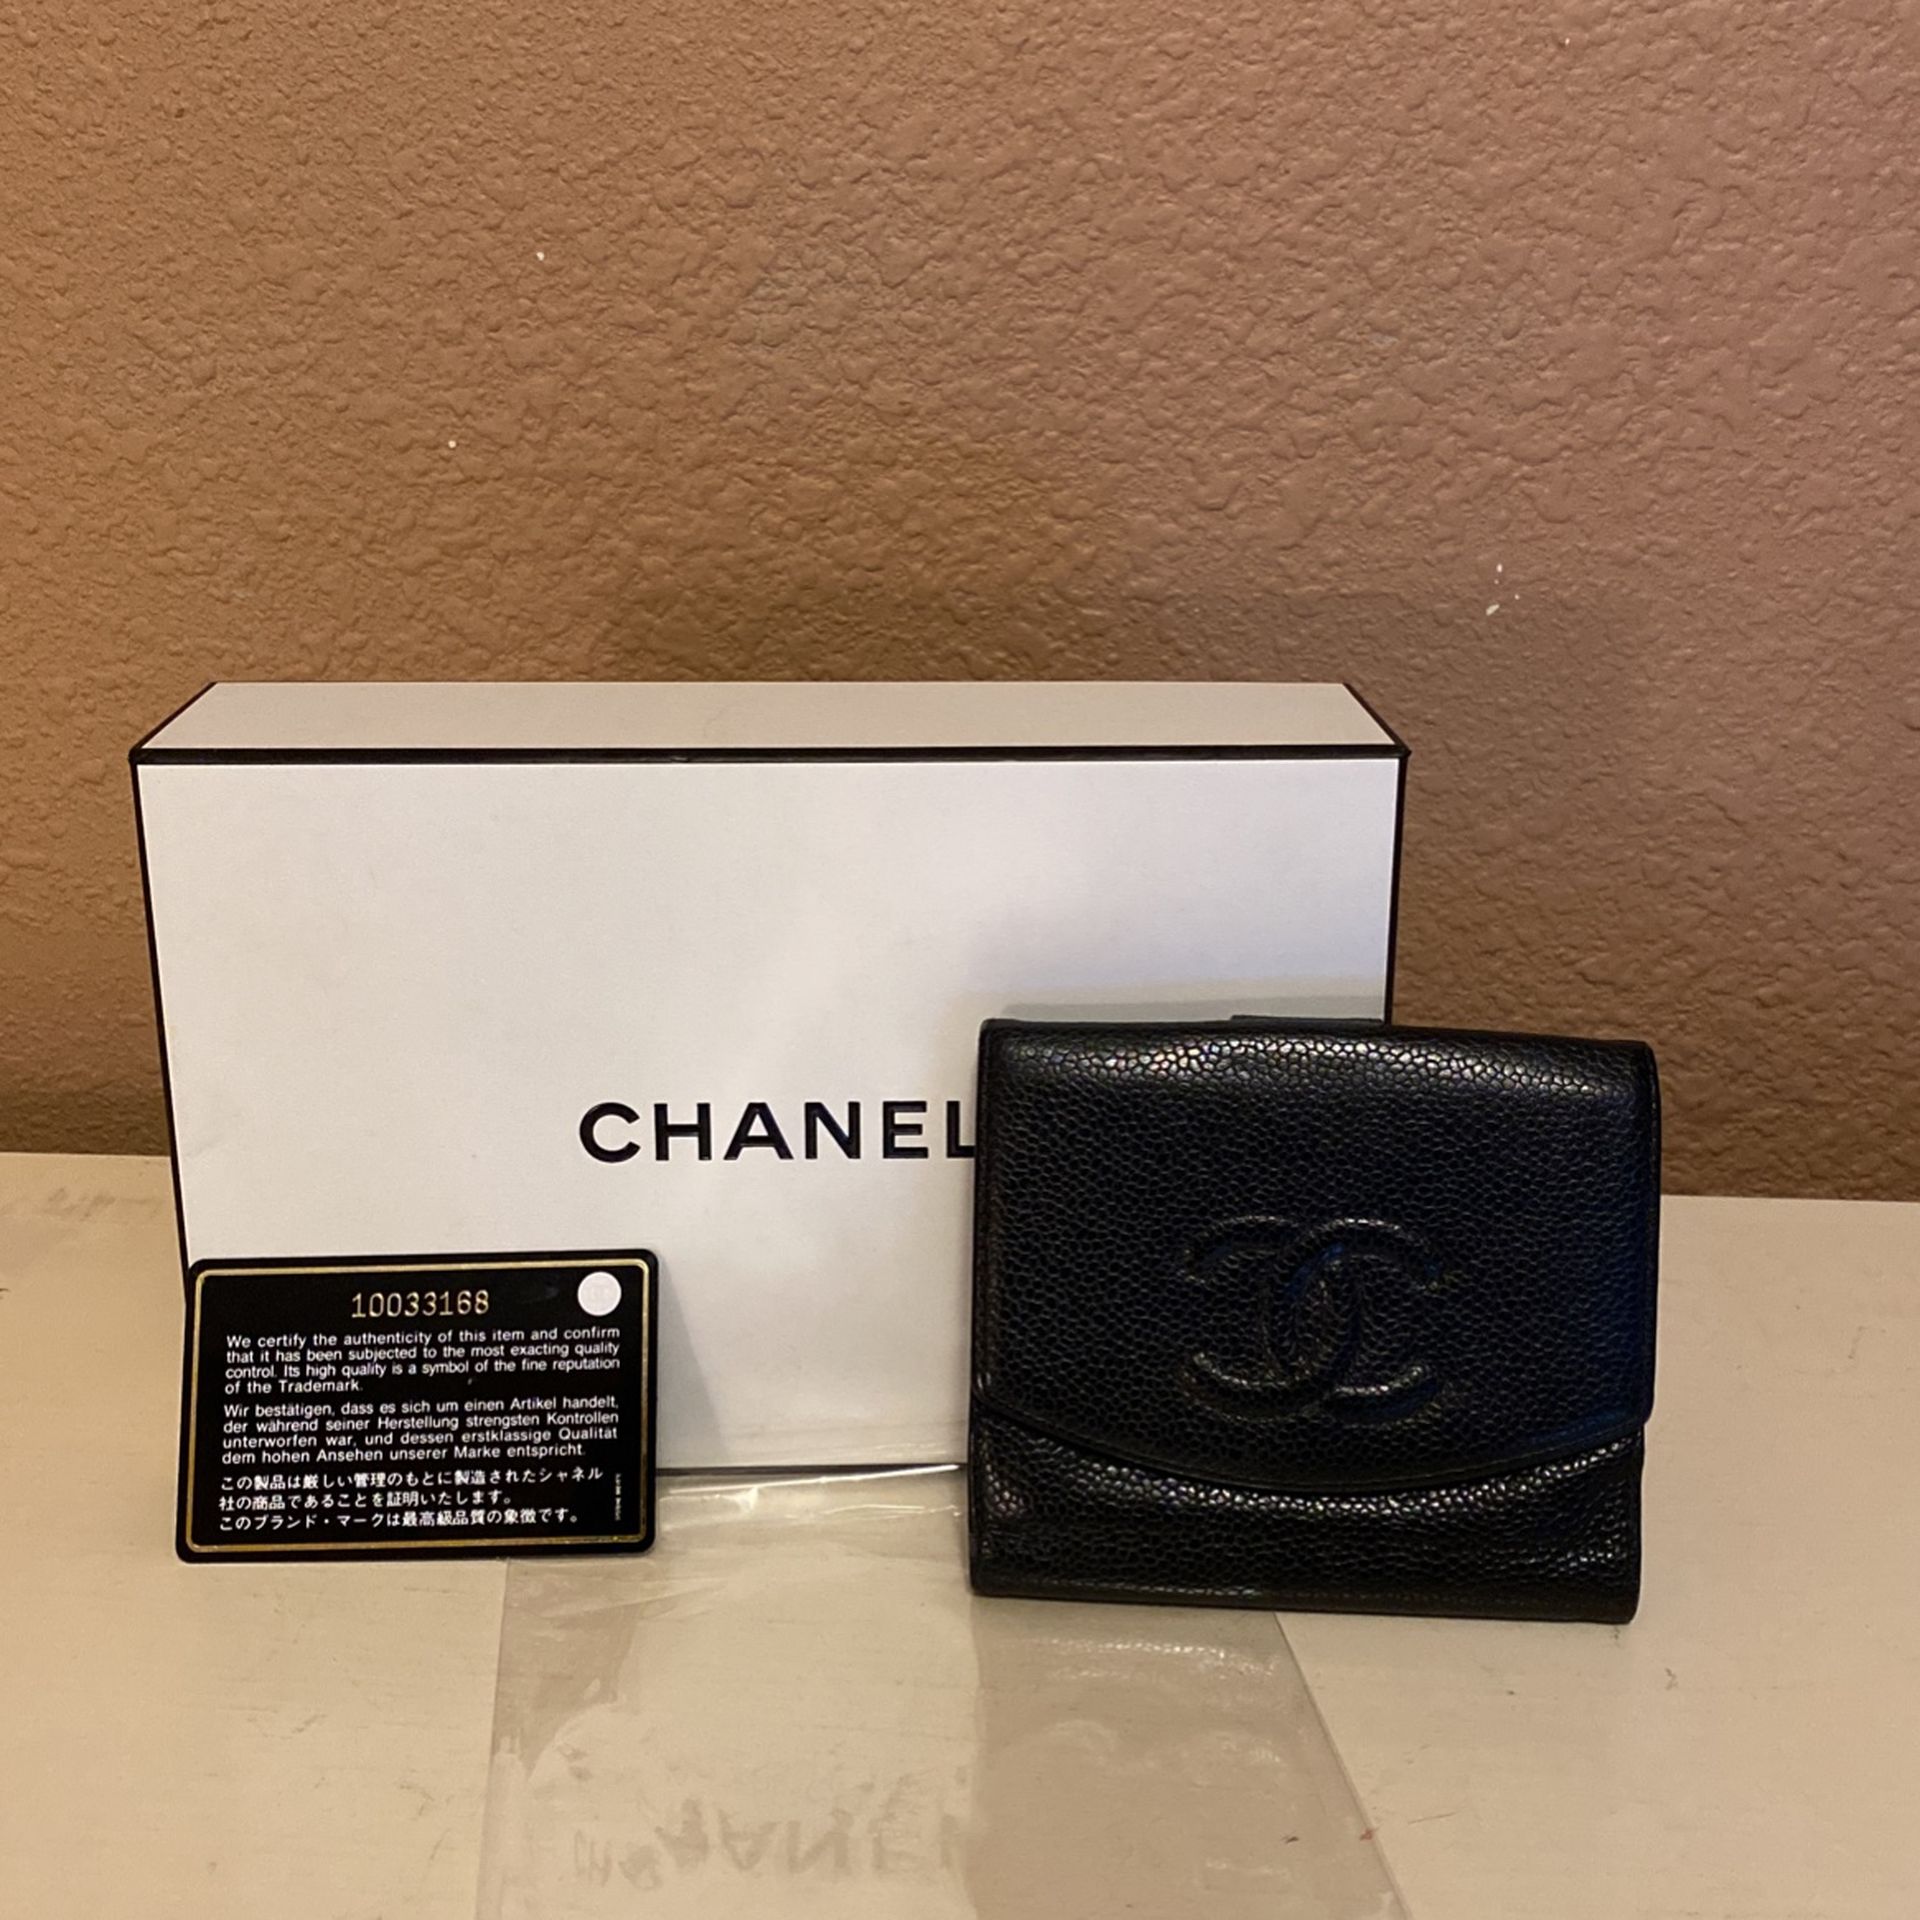 Chanel New Authentic C C Logo Black Caviar Skin All Leather Bifold Wallet With Serial Number Seal And Authenticity Card $300obo C My Page Ty